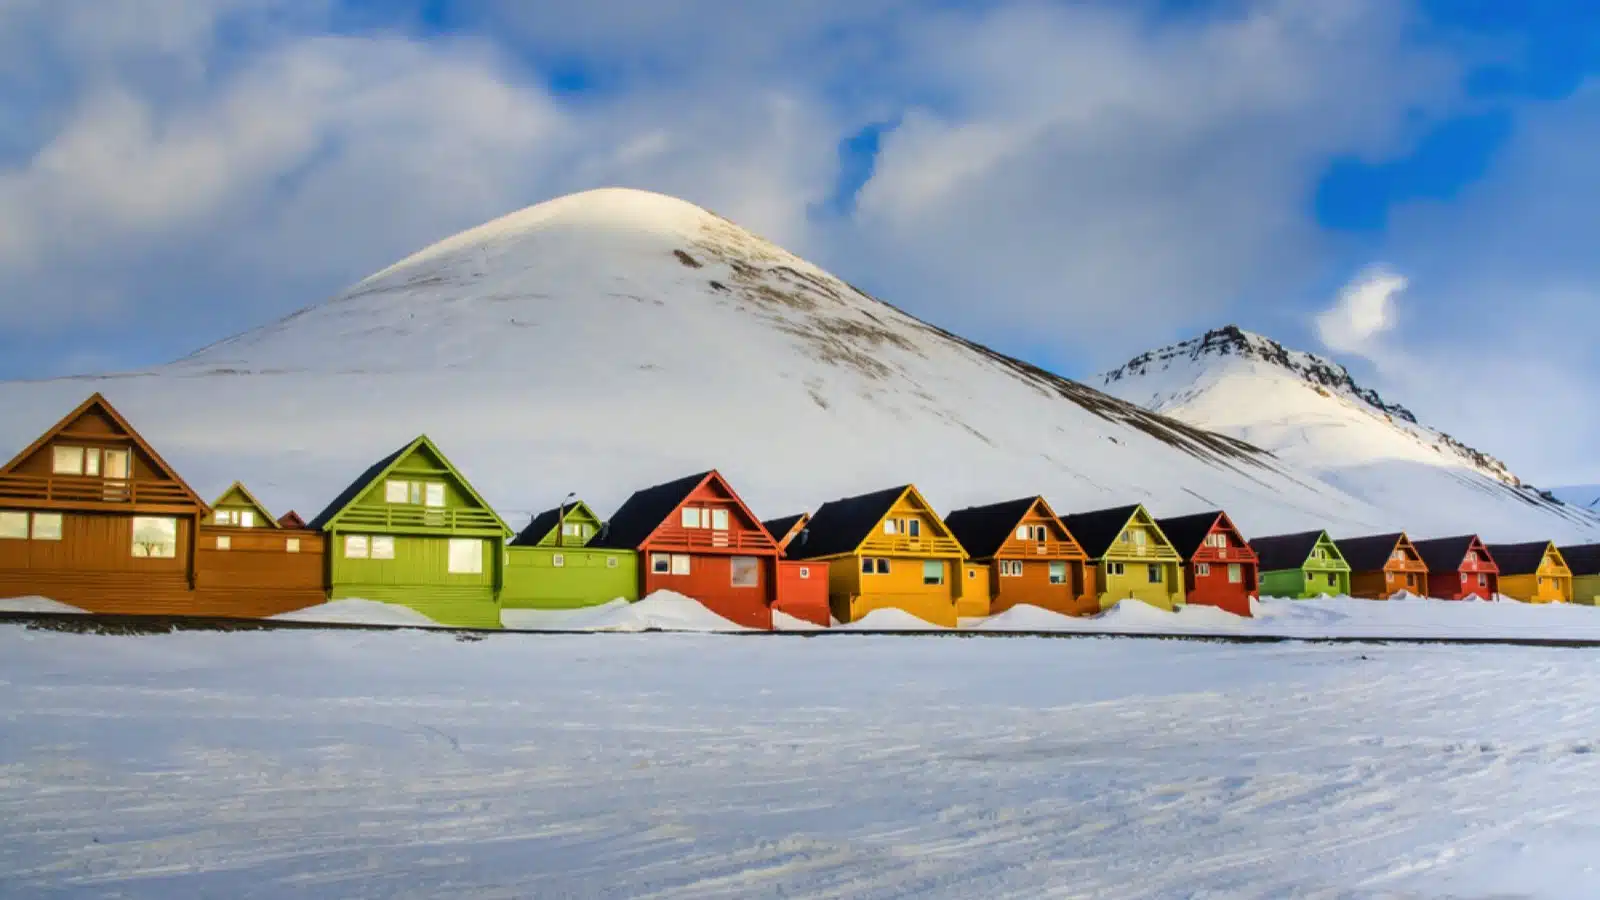 The colorful houses of the town of Longyearbyen, the largest settlement and the administrative center of Svalbard, Norway